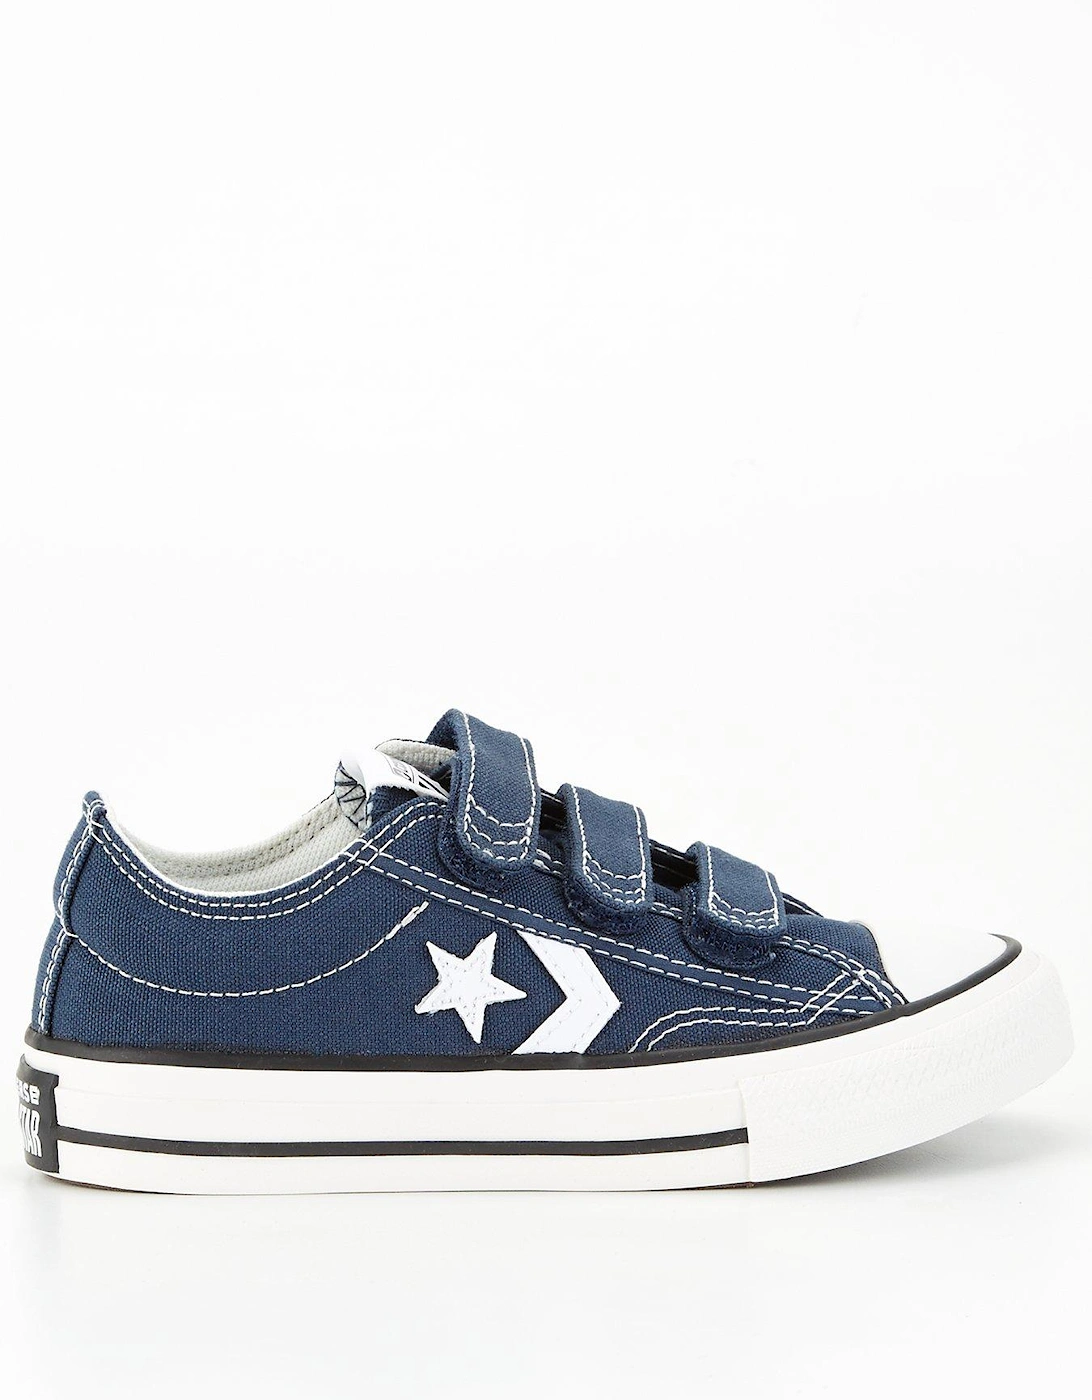 Kids Star Player 76 Ox Trainers - Navy/black, 7 of 6